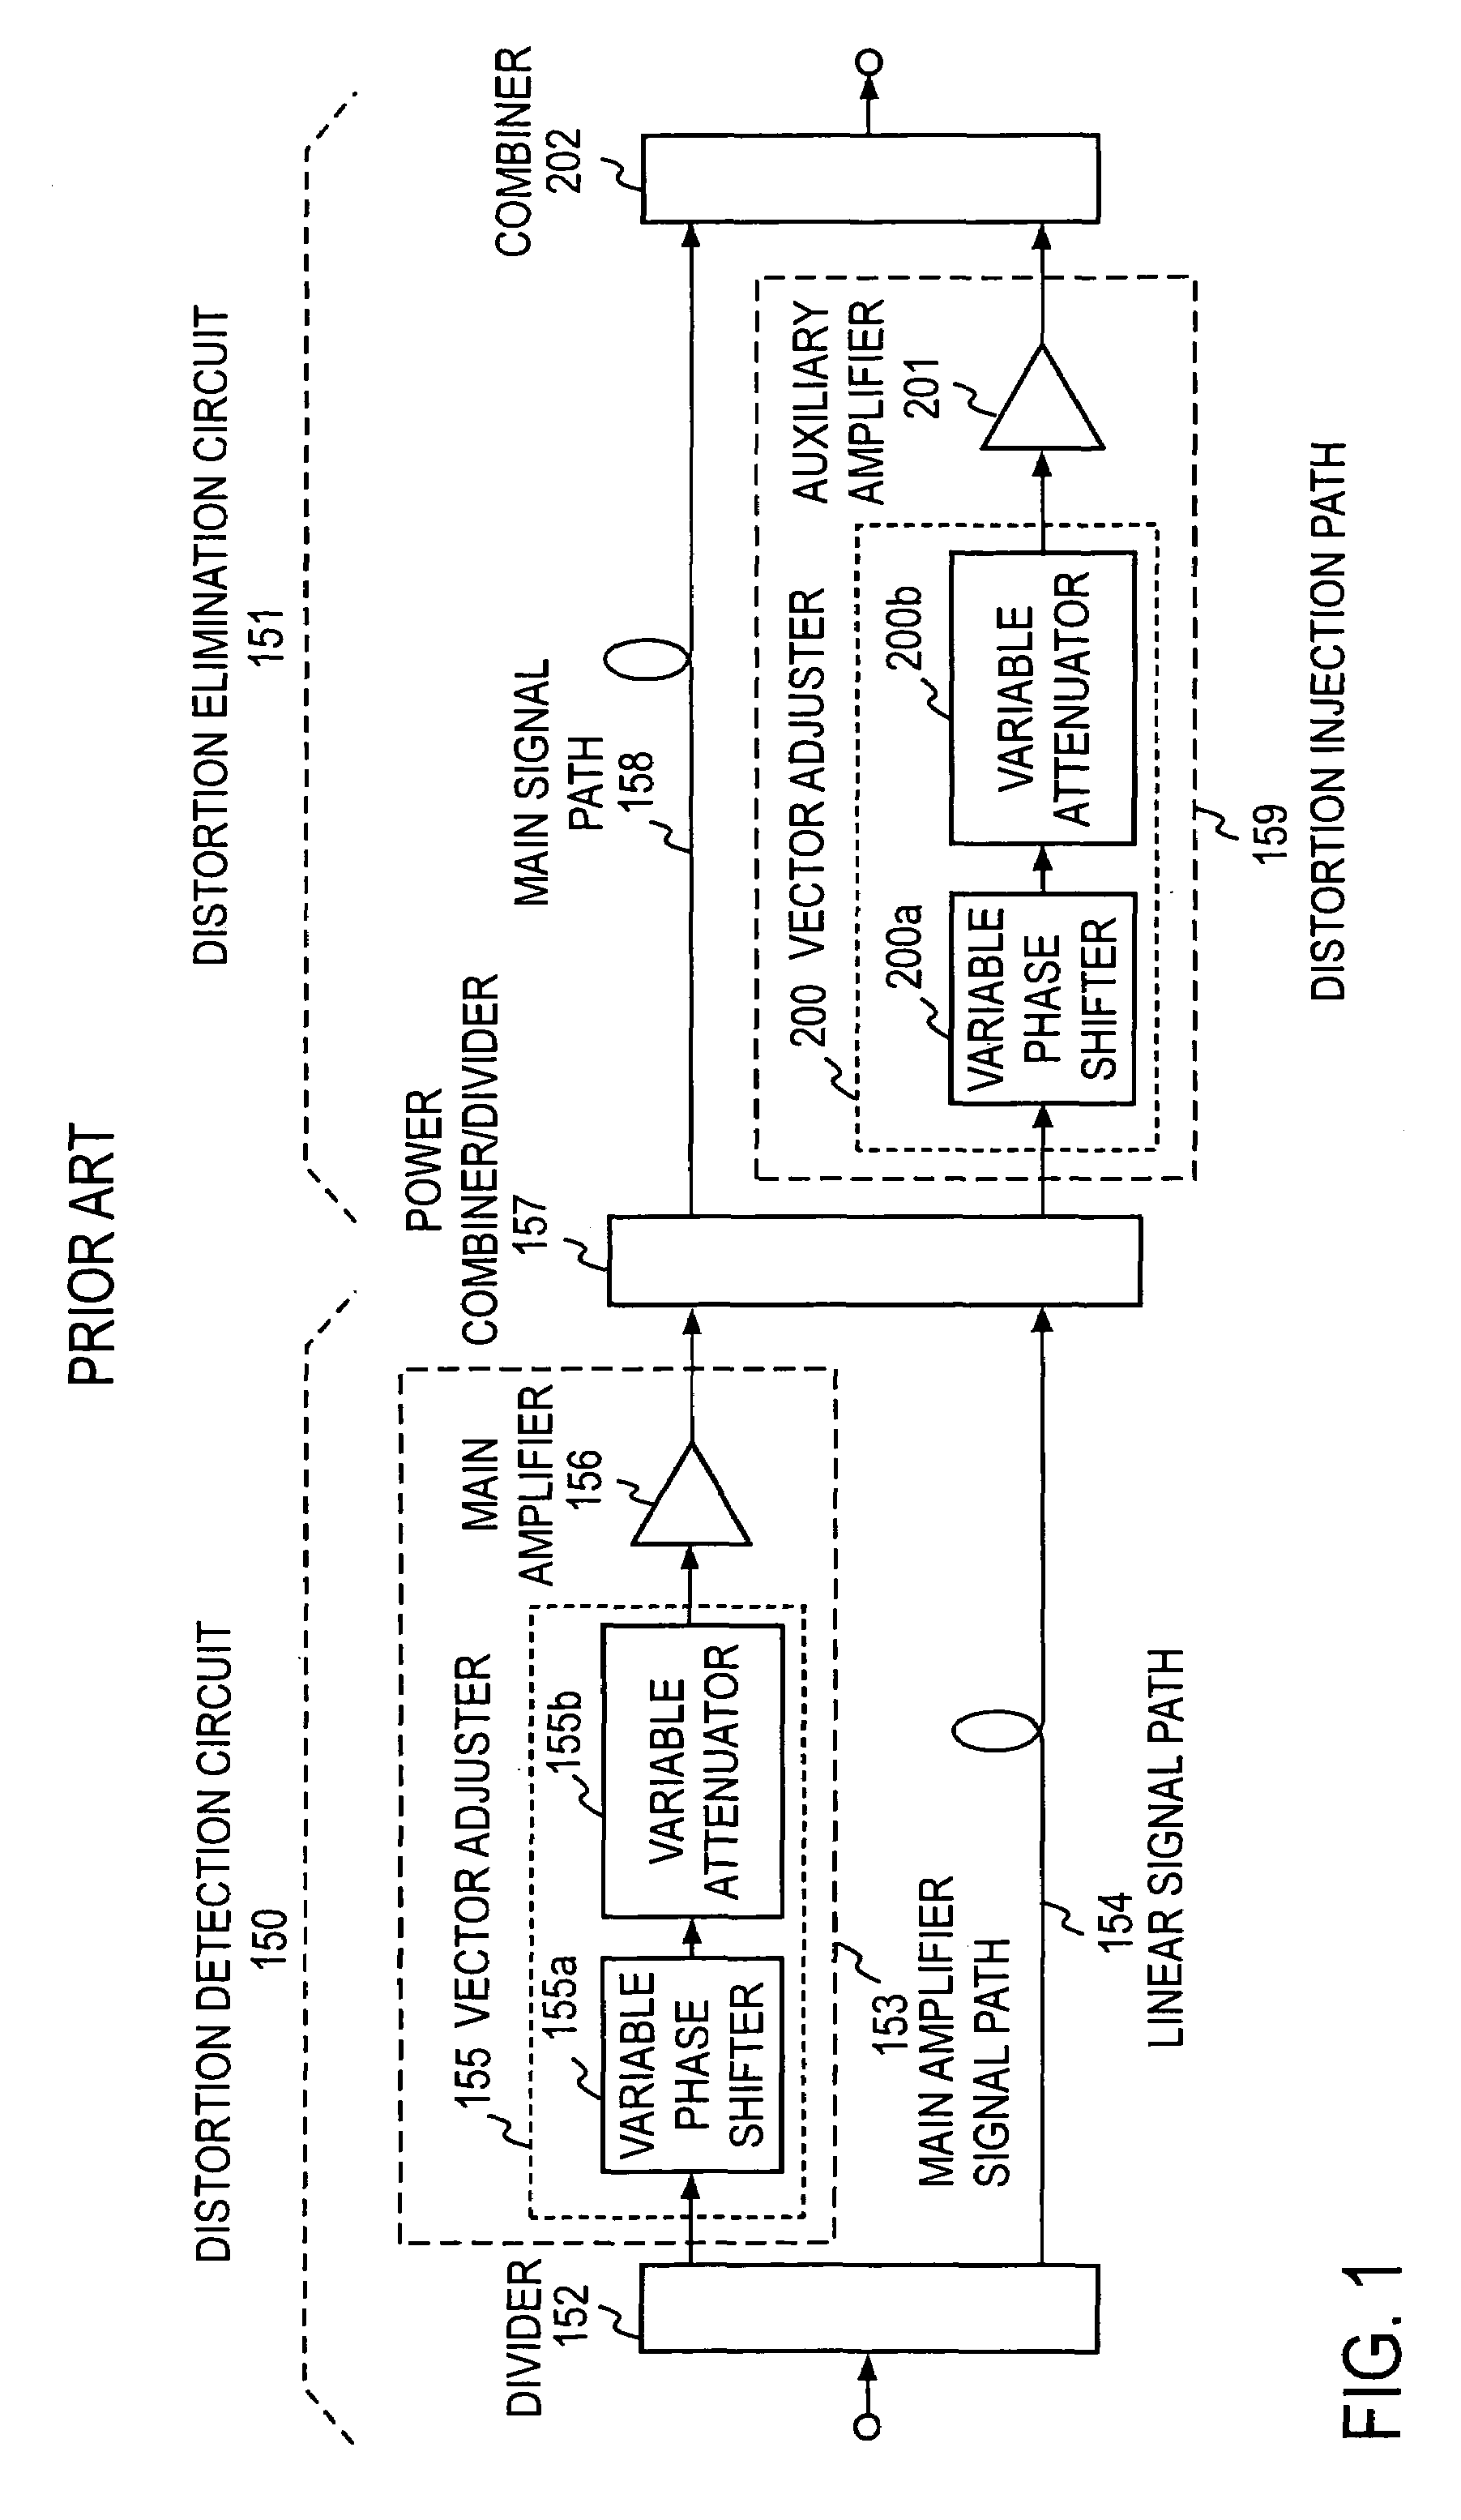 Feed forward amplifier for multiple frequency bands